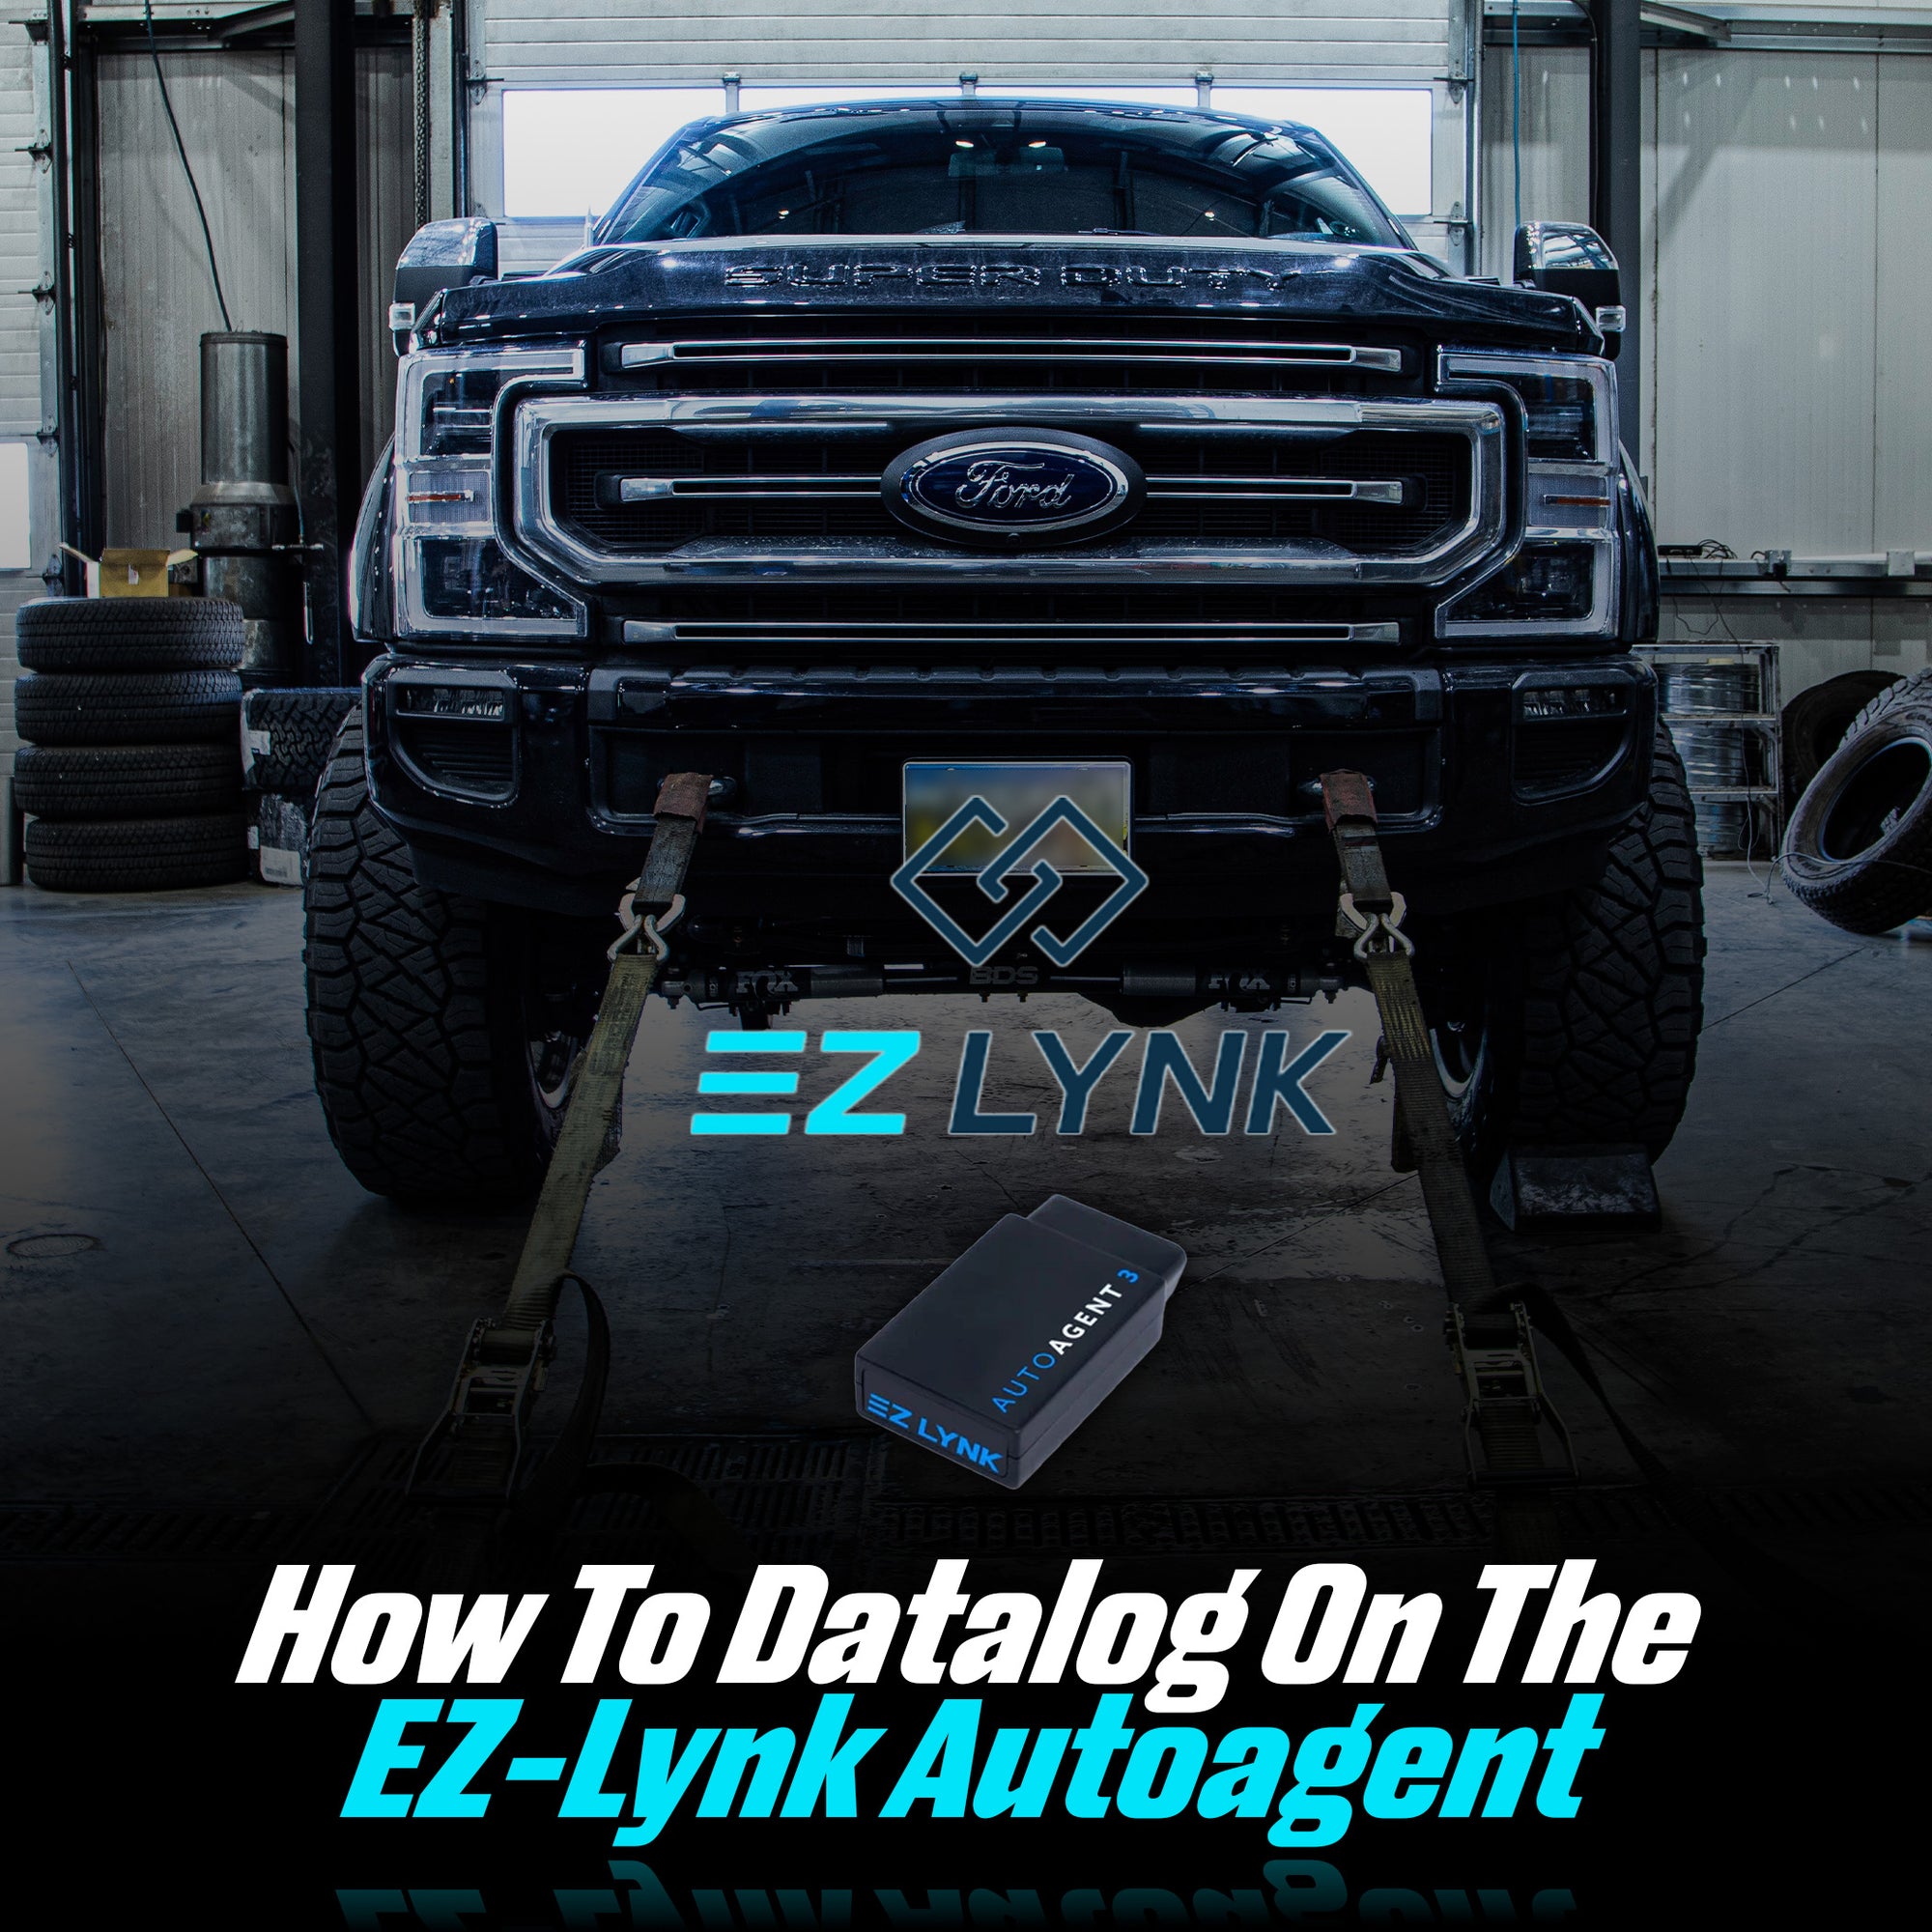 How To Datalog on the EZ-Lynk Autoagent